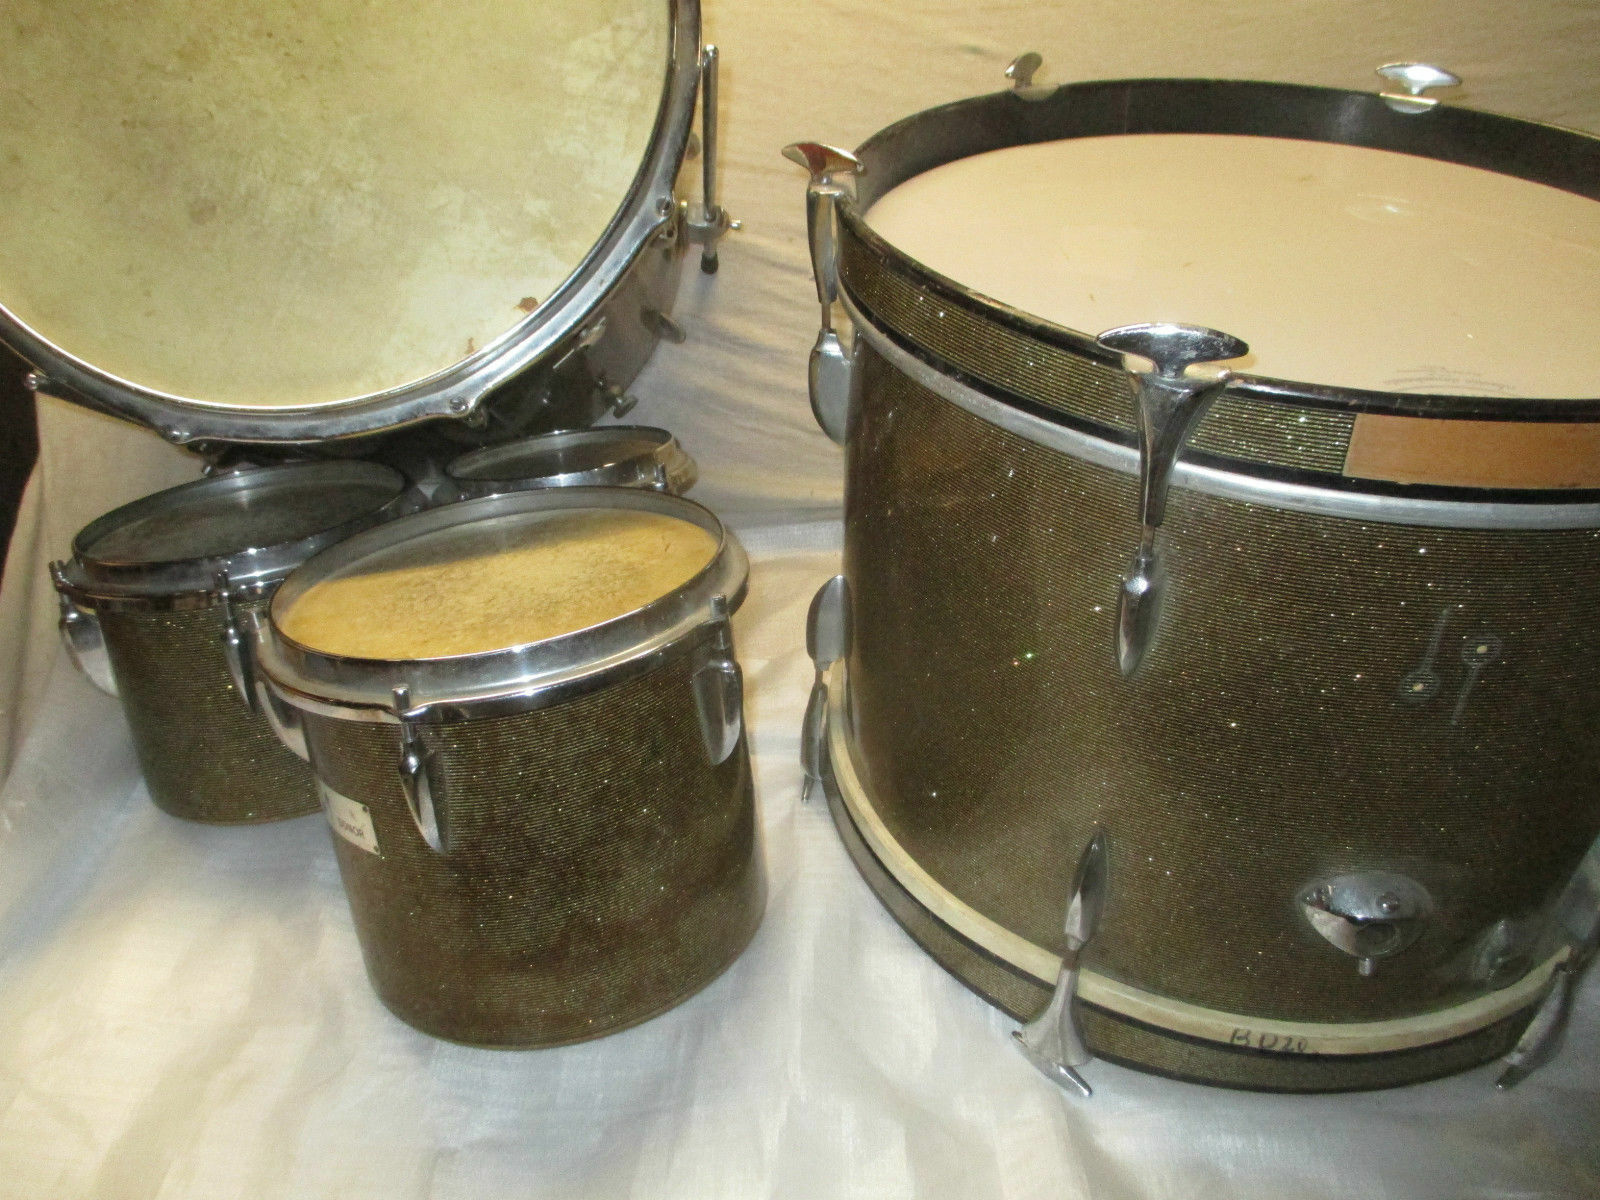 50's Sonor Drum Kit With 3 Concert Toms